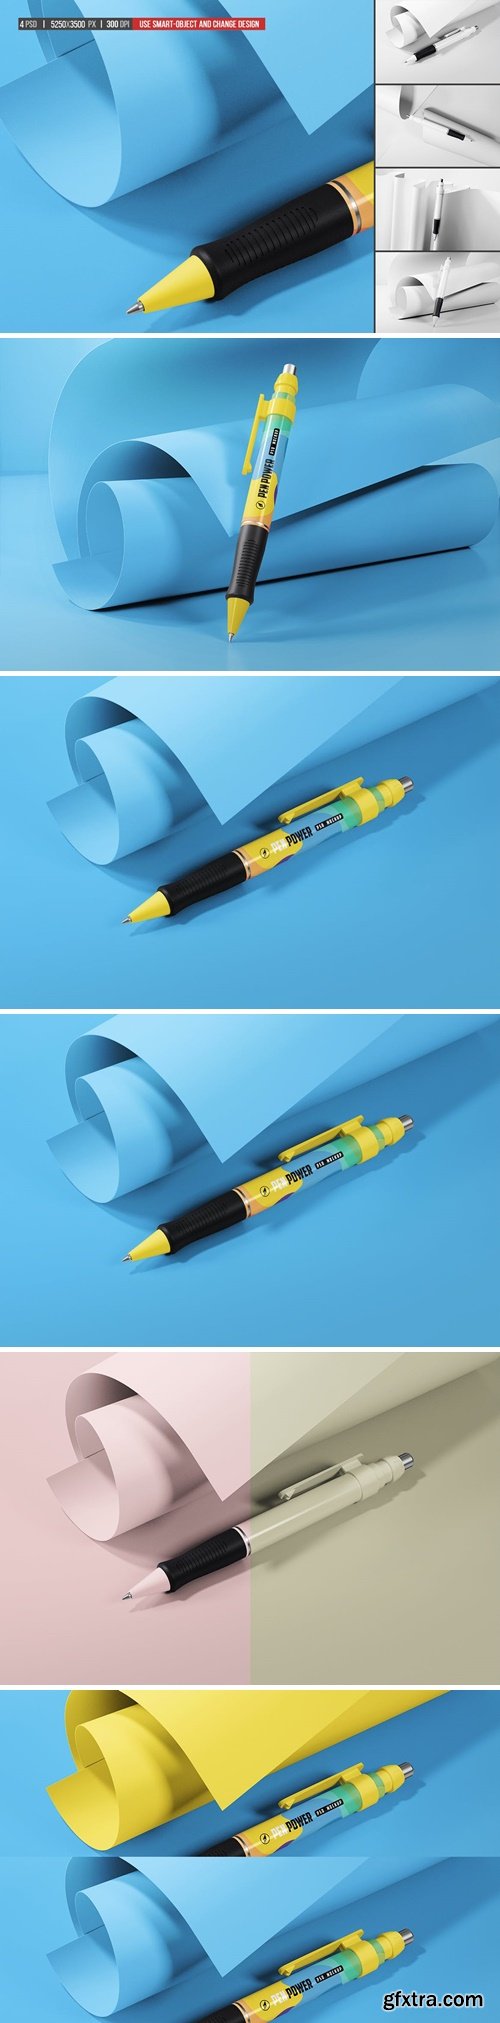 Ballpoint Pen With Rolled Paper Mockup BV6PTRY